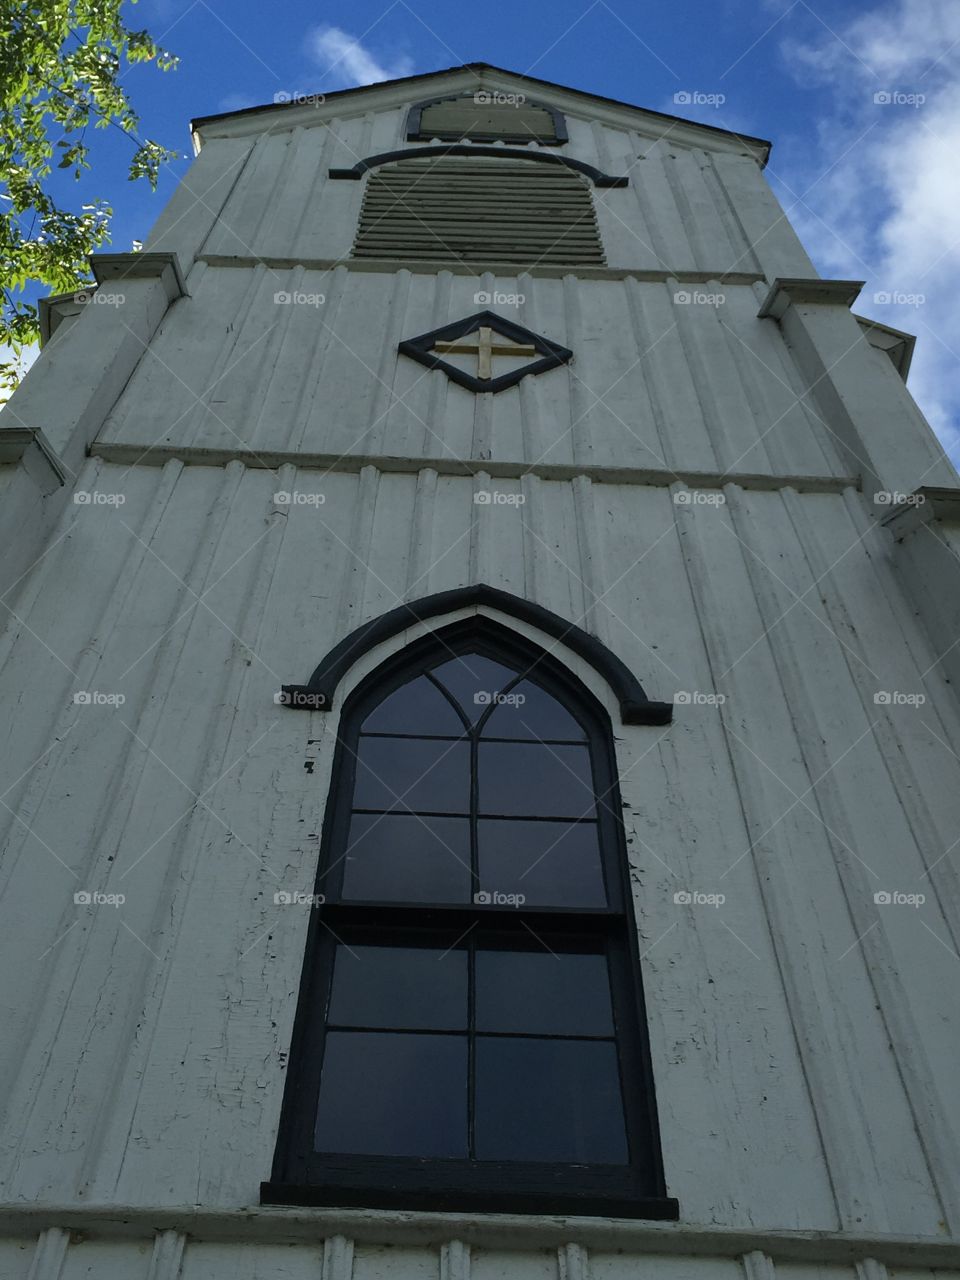 Looking upward at the front of an old wooden church that's active only 10 weeks a year.  Volunteer pastors lead non-denominational, Christian services.